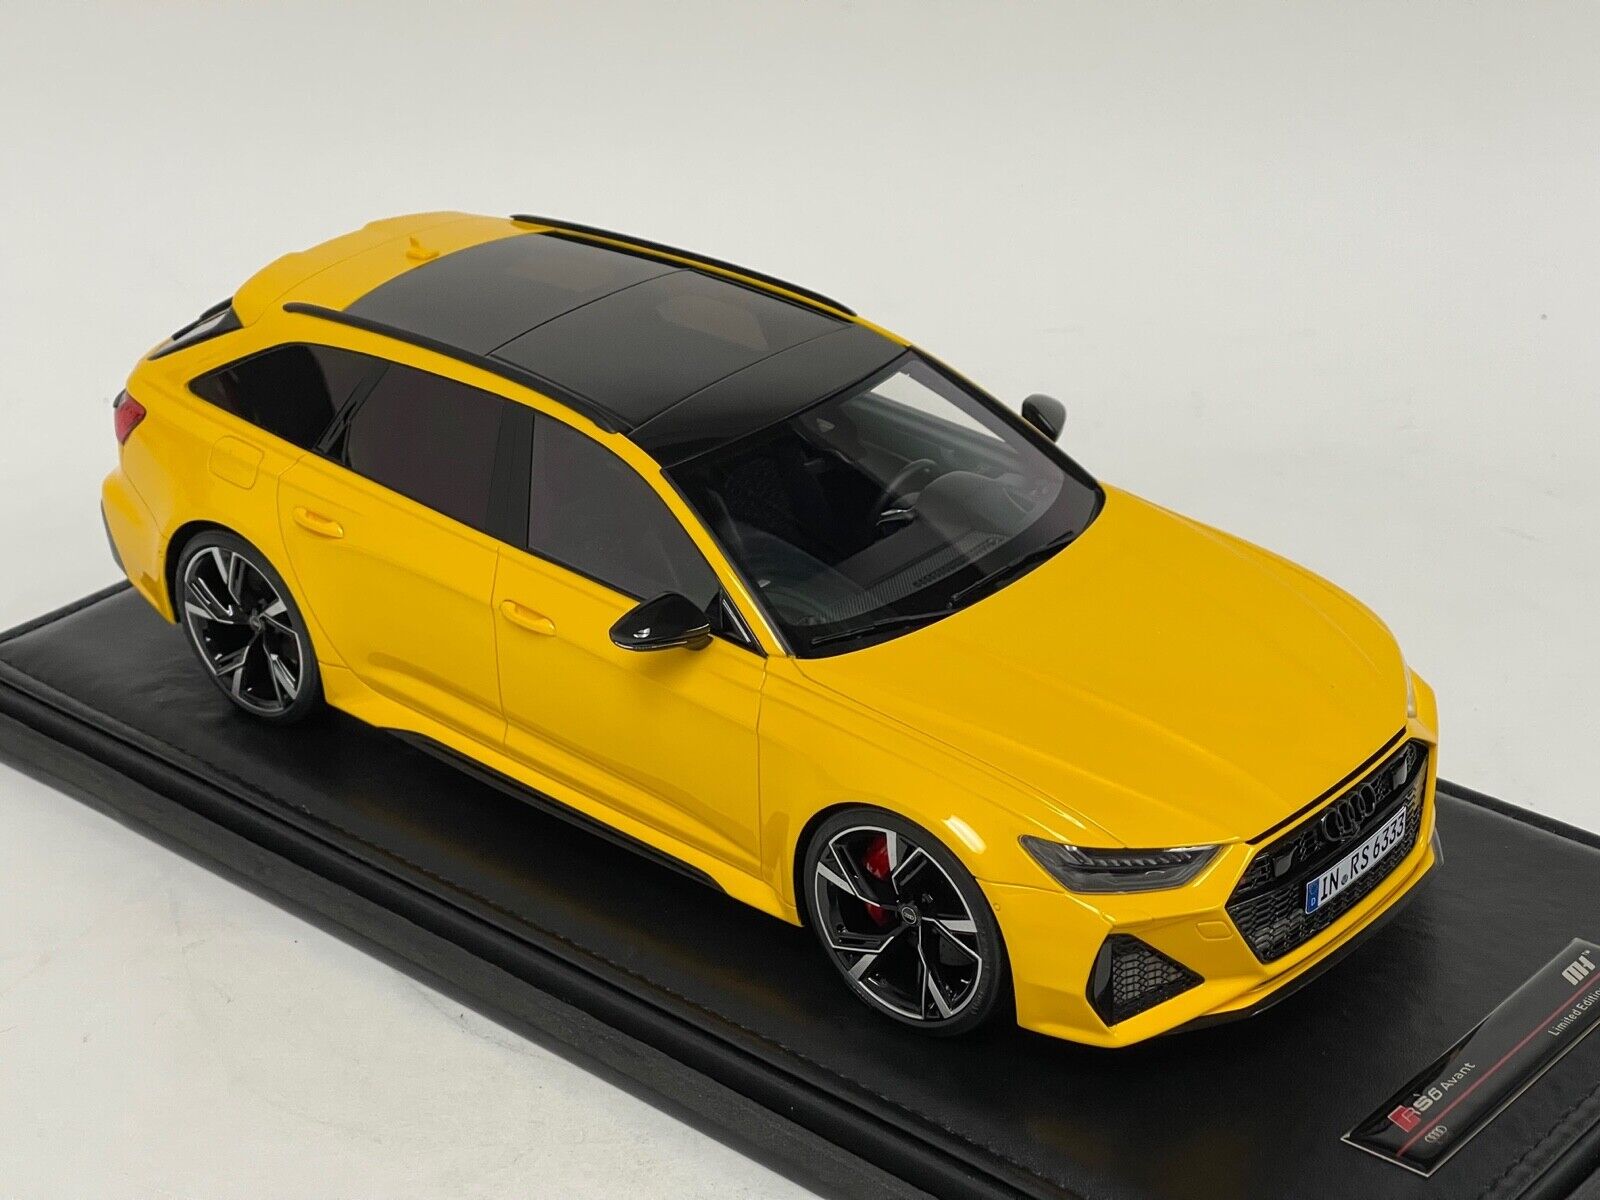 1/18 MotorHelix Audi RS6 Avant in Yellow 2020 Limited to 99 pieces eBay